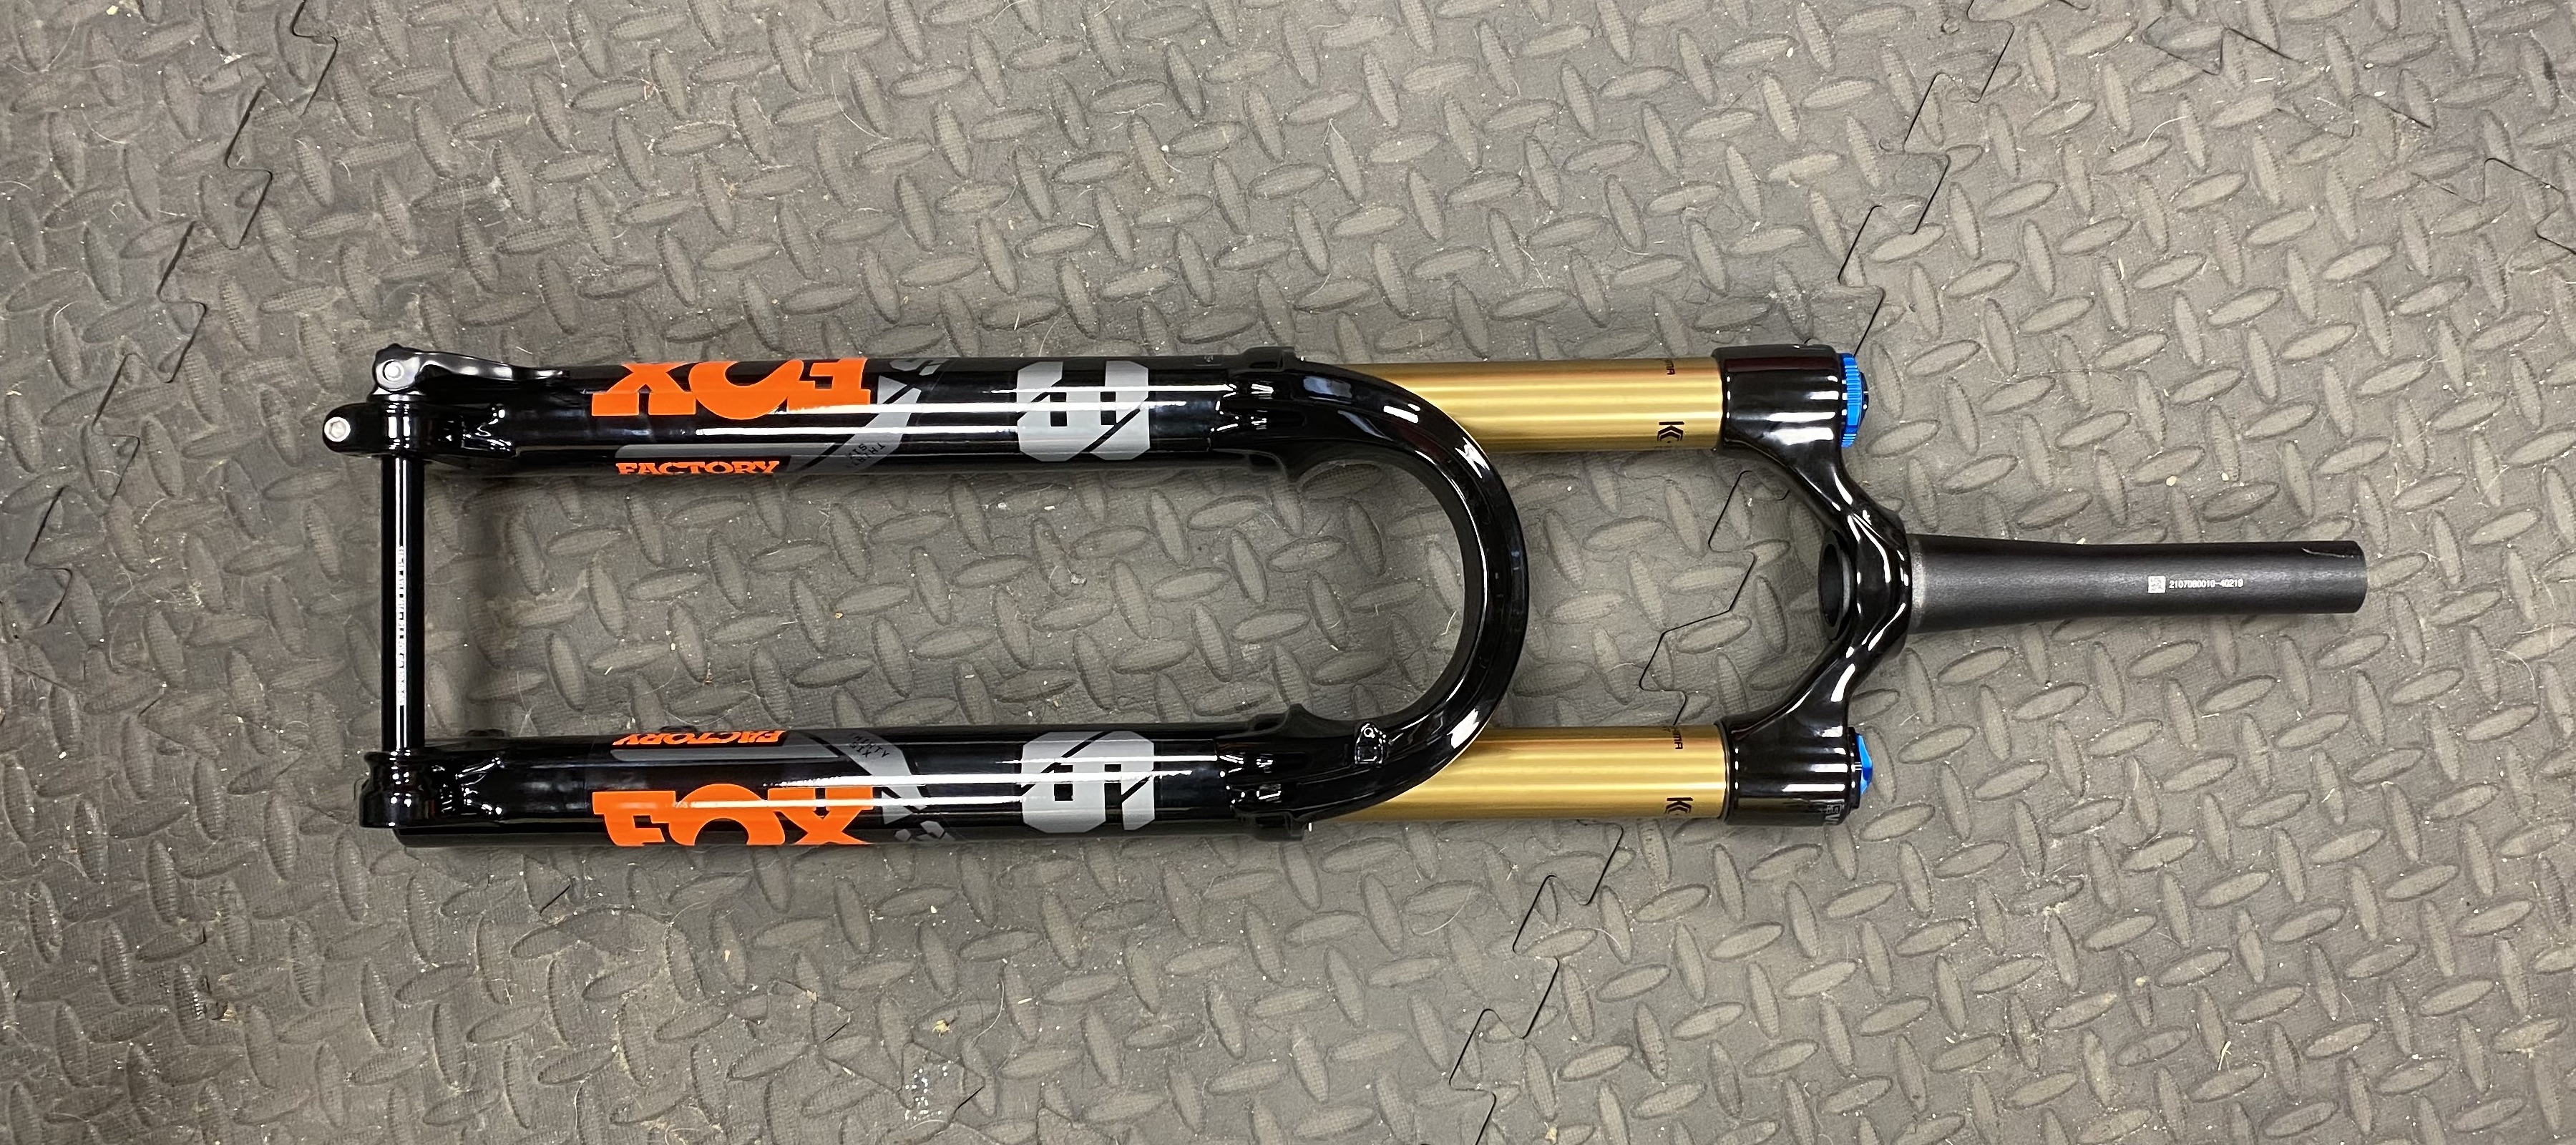 Fox Float 36 Factory GRIP2 fork review – the benchmark burly trail fork